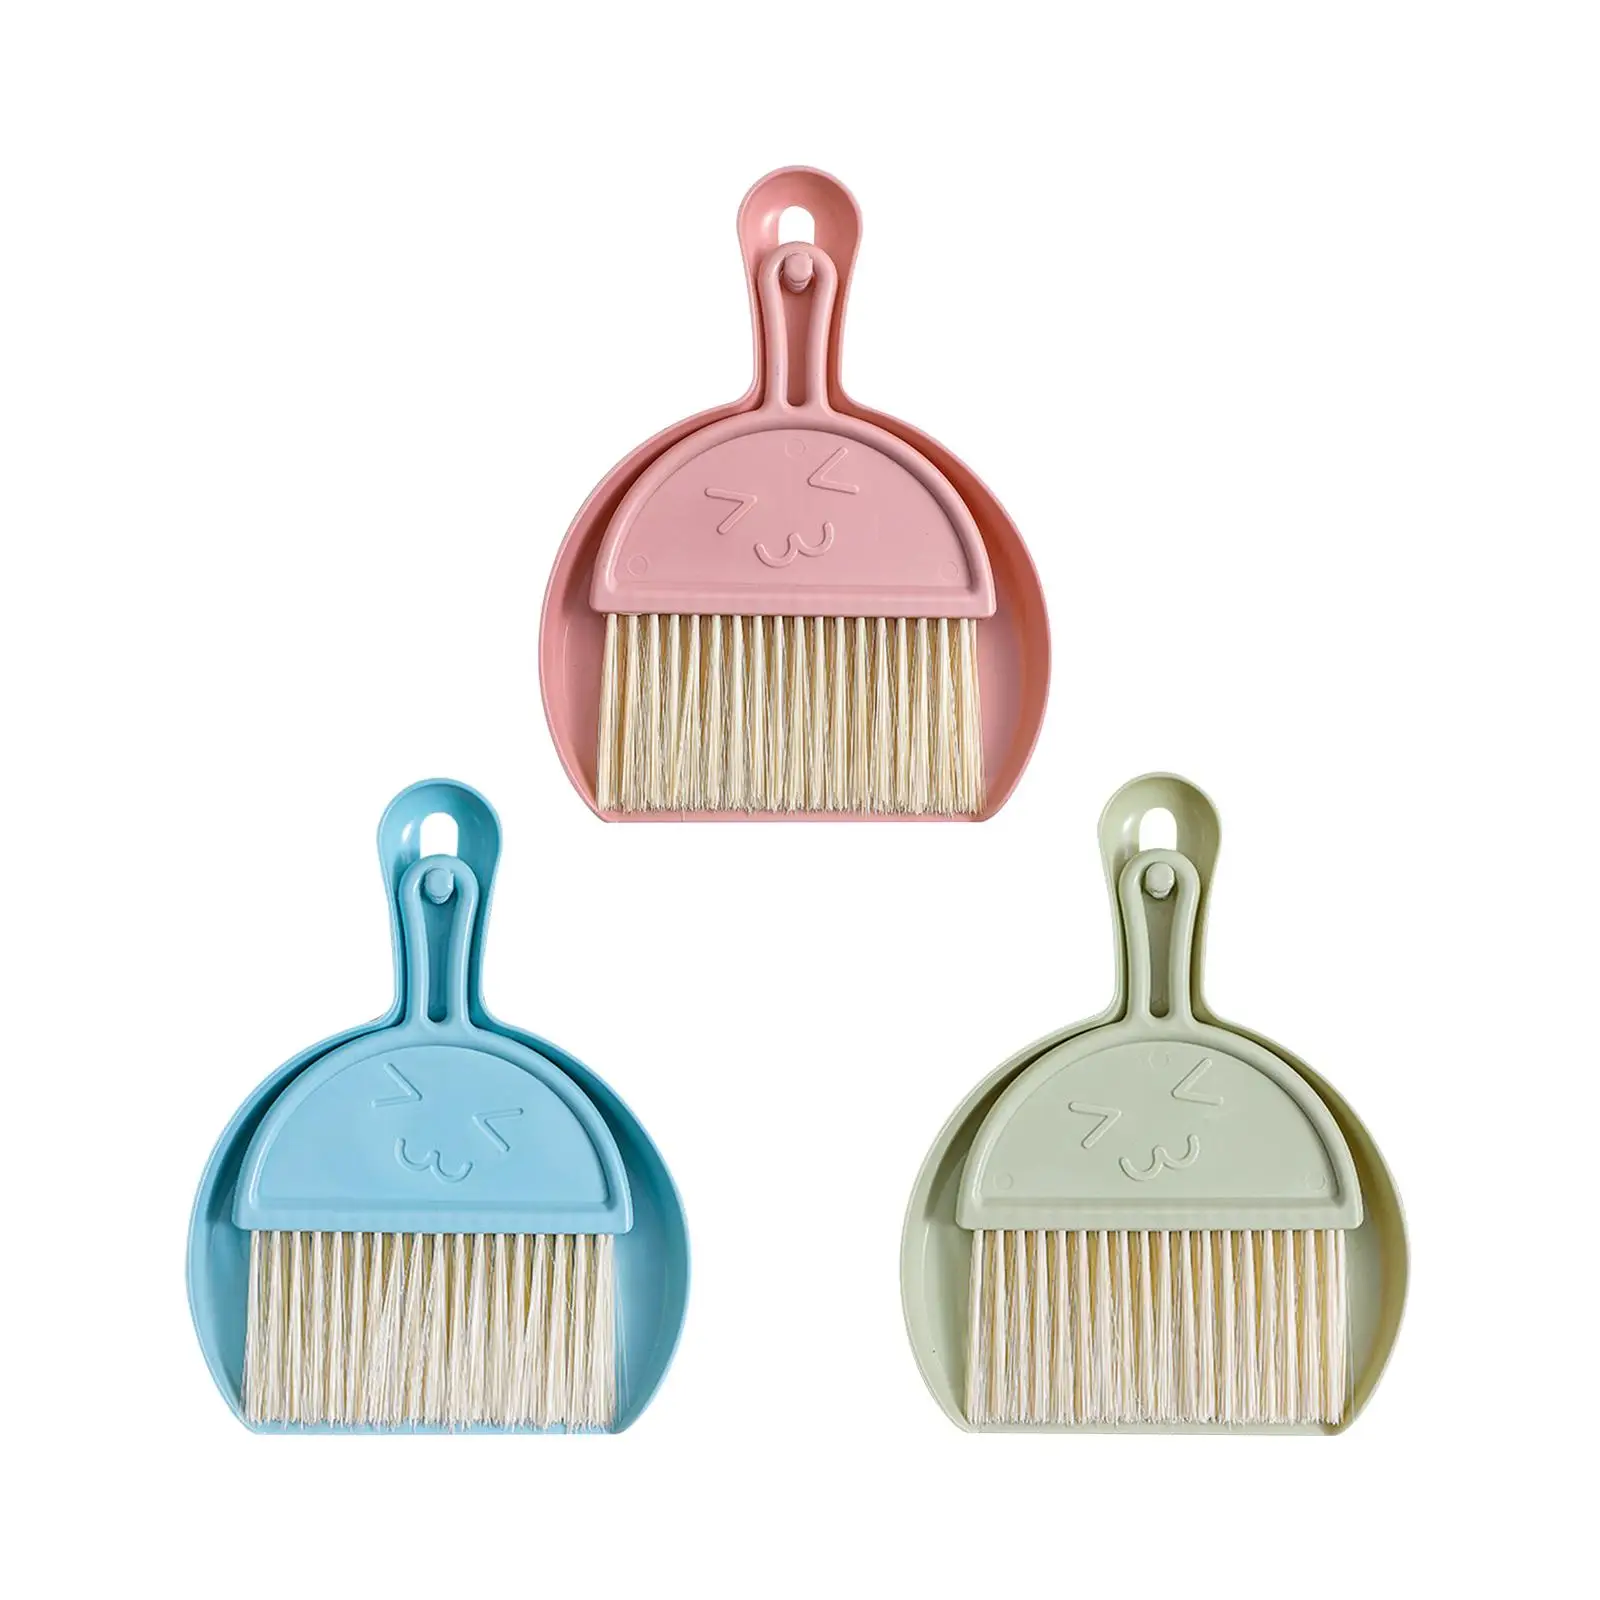 Small Dustpan and Brush Hand Broom Sweeping Tool for Table Sofa Office